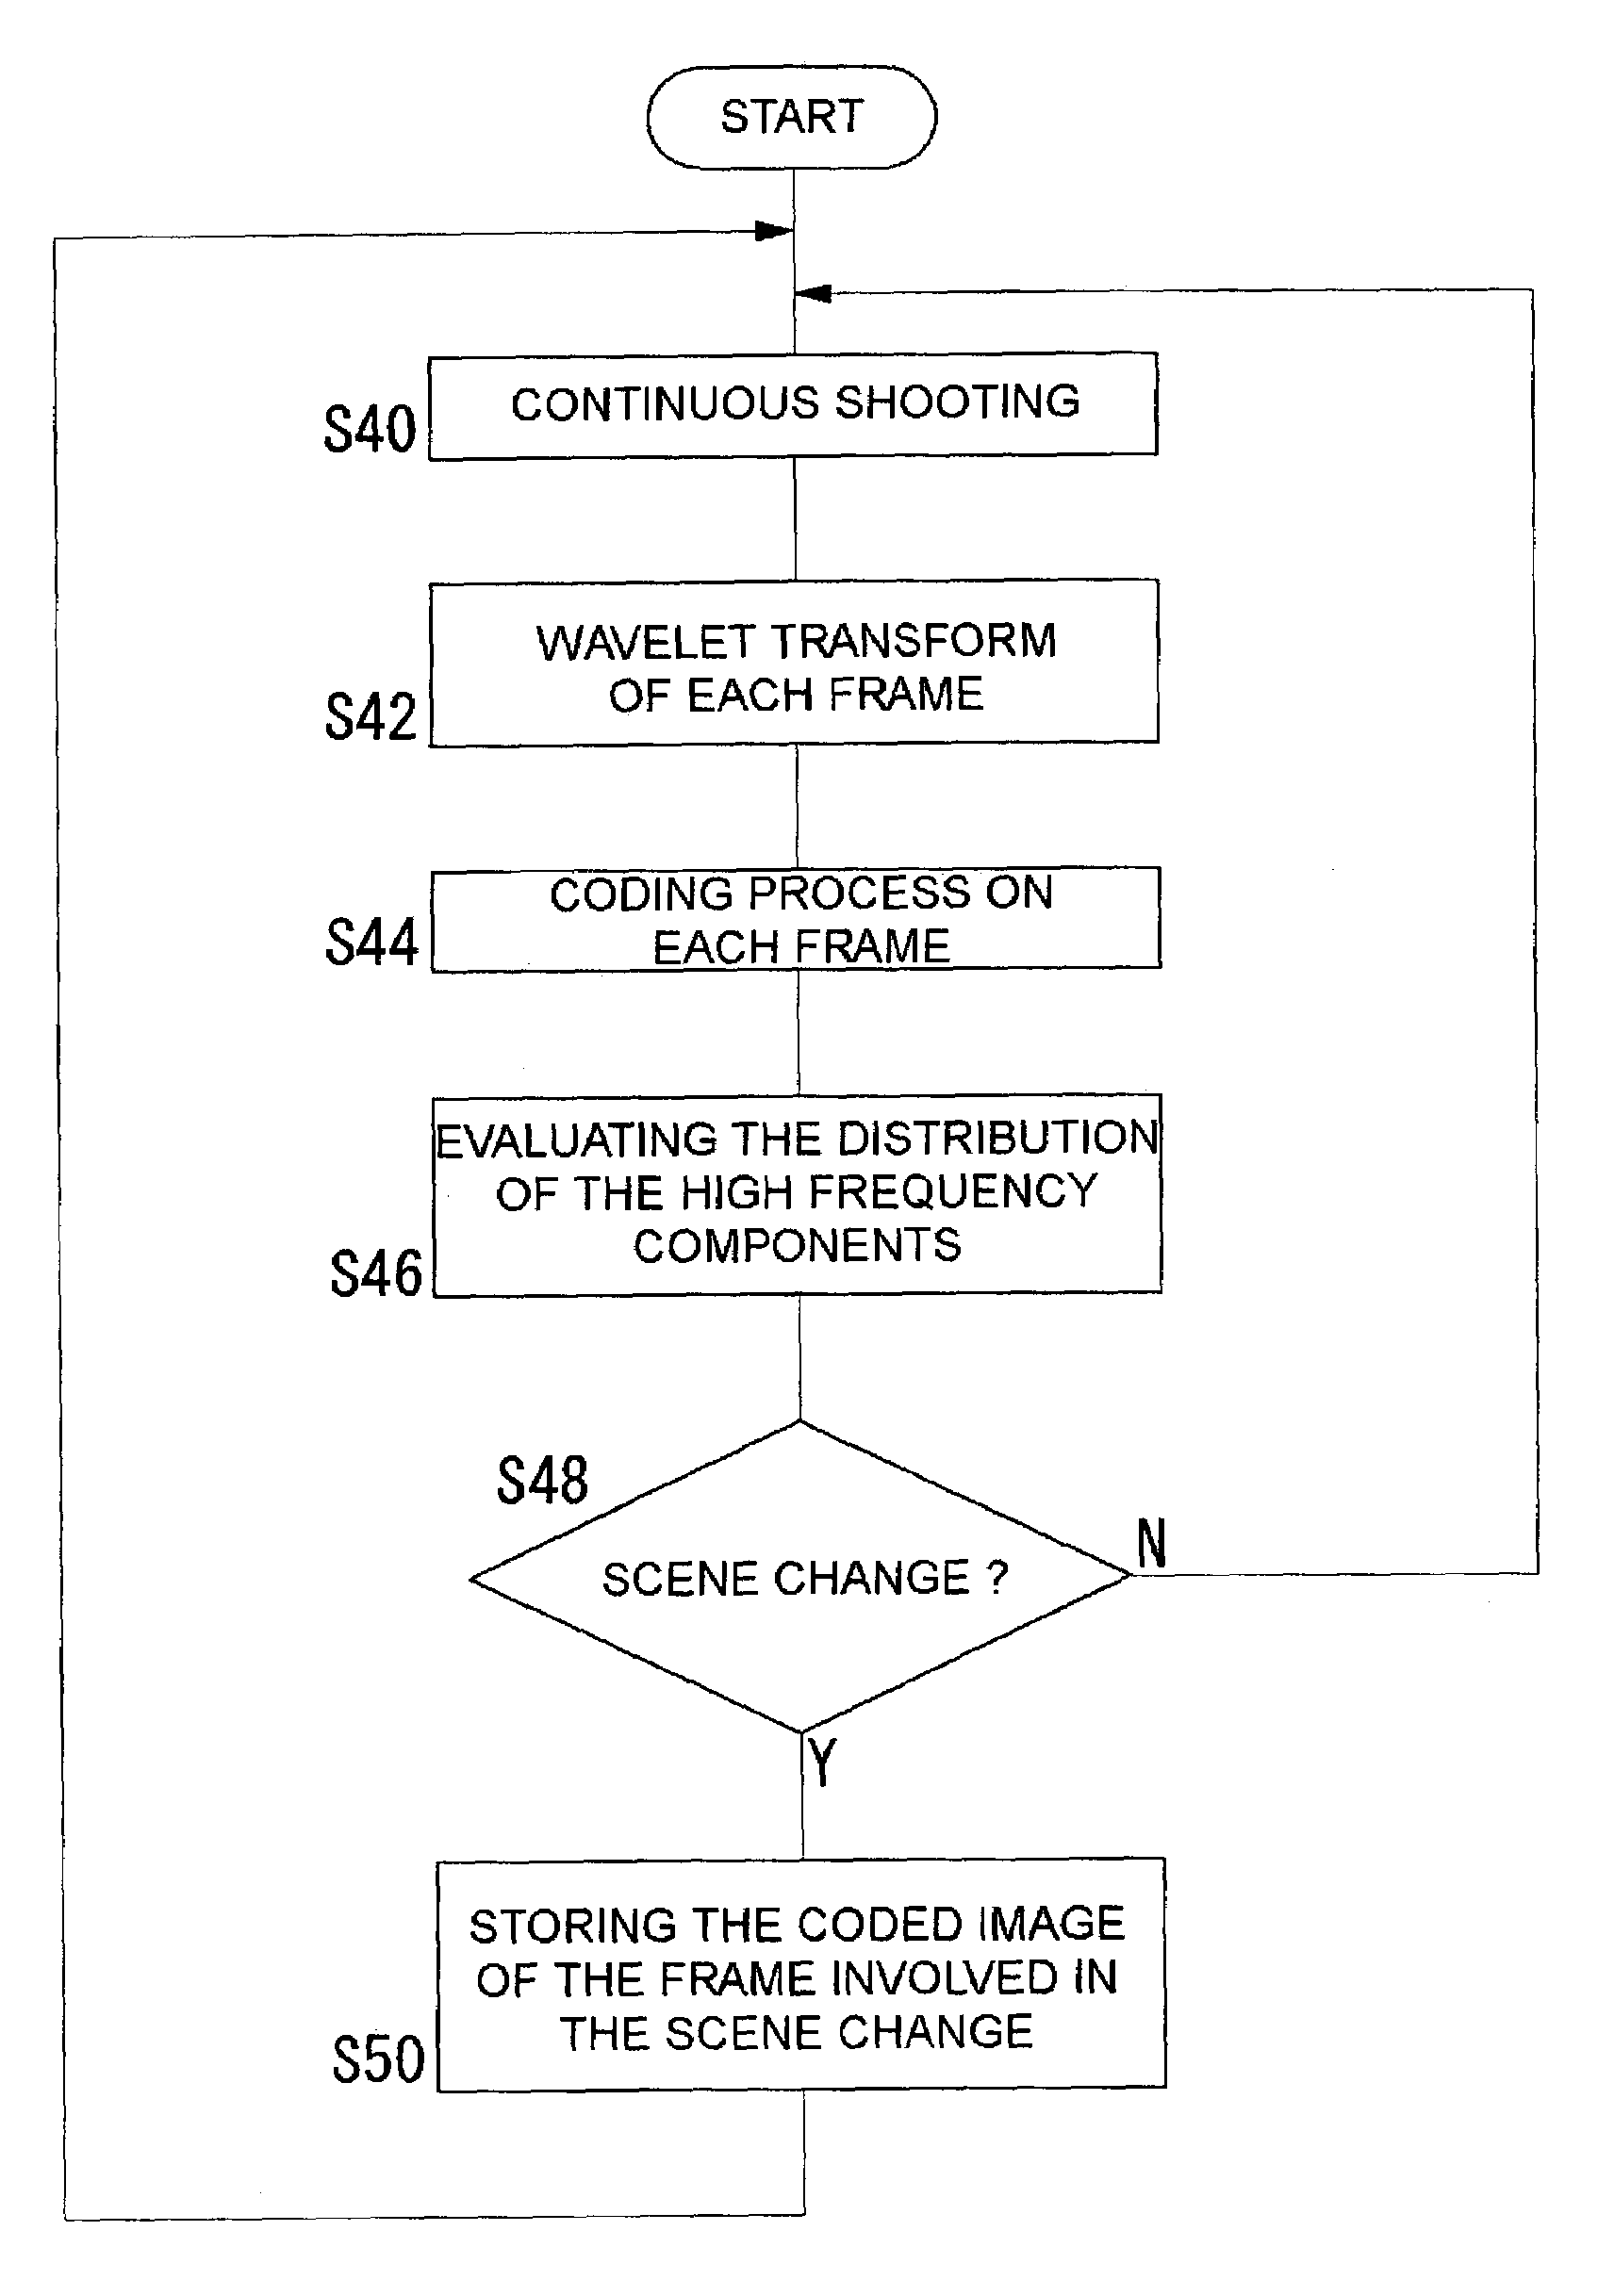 Image coding apparatus and method